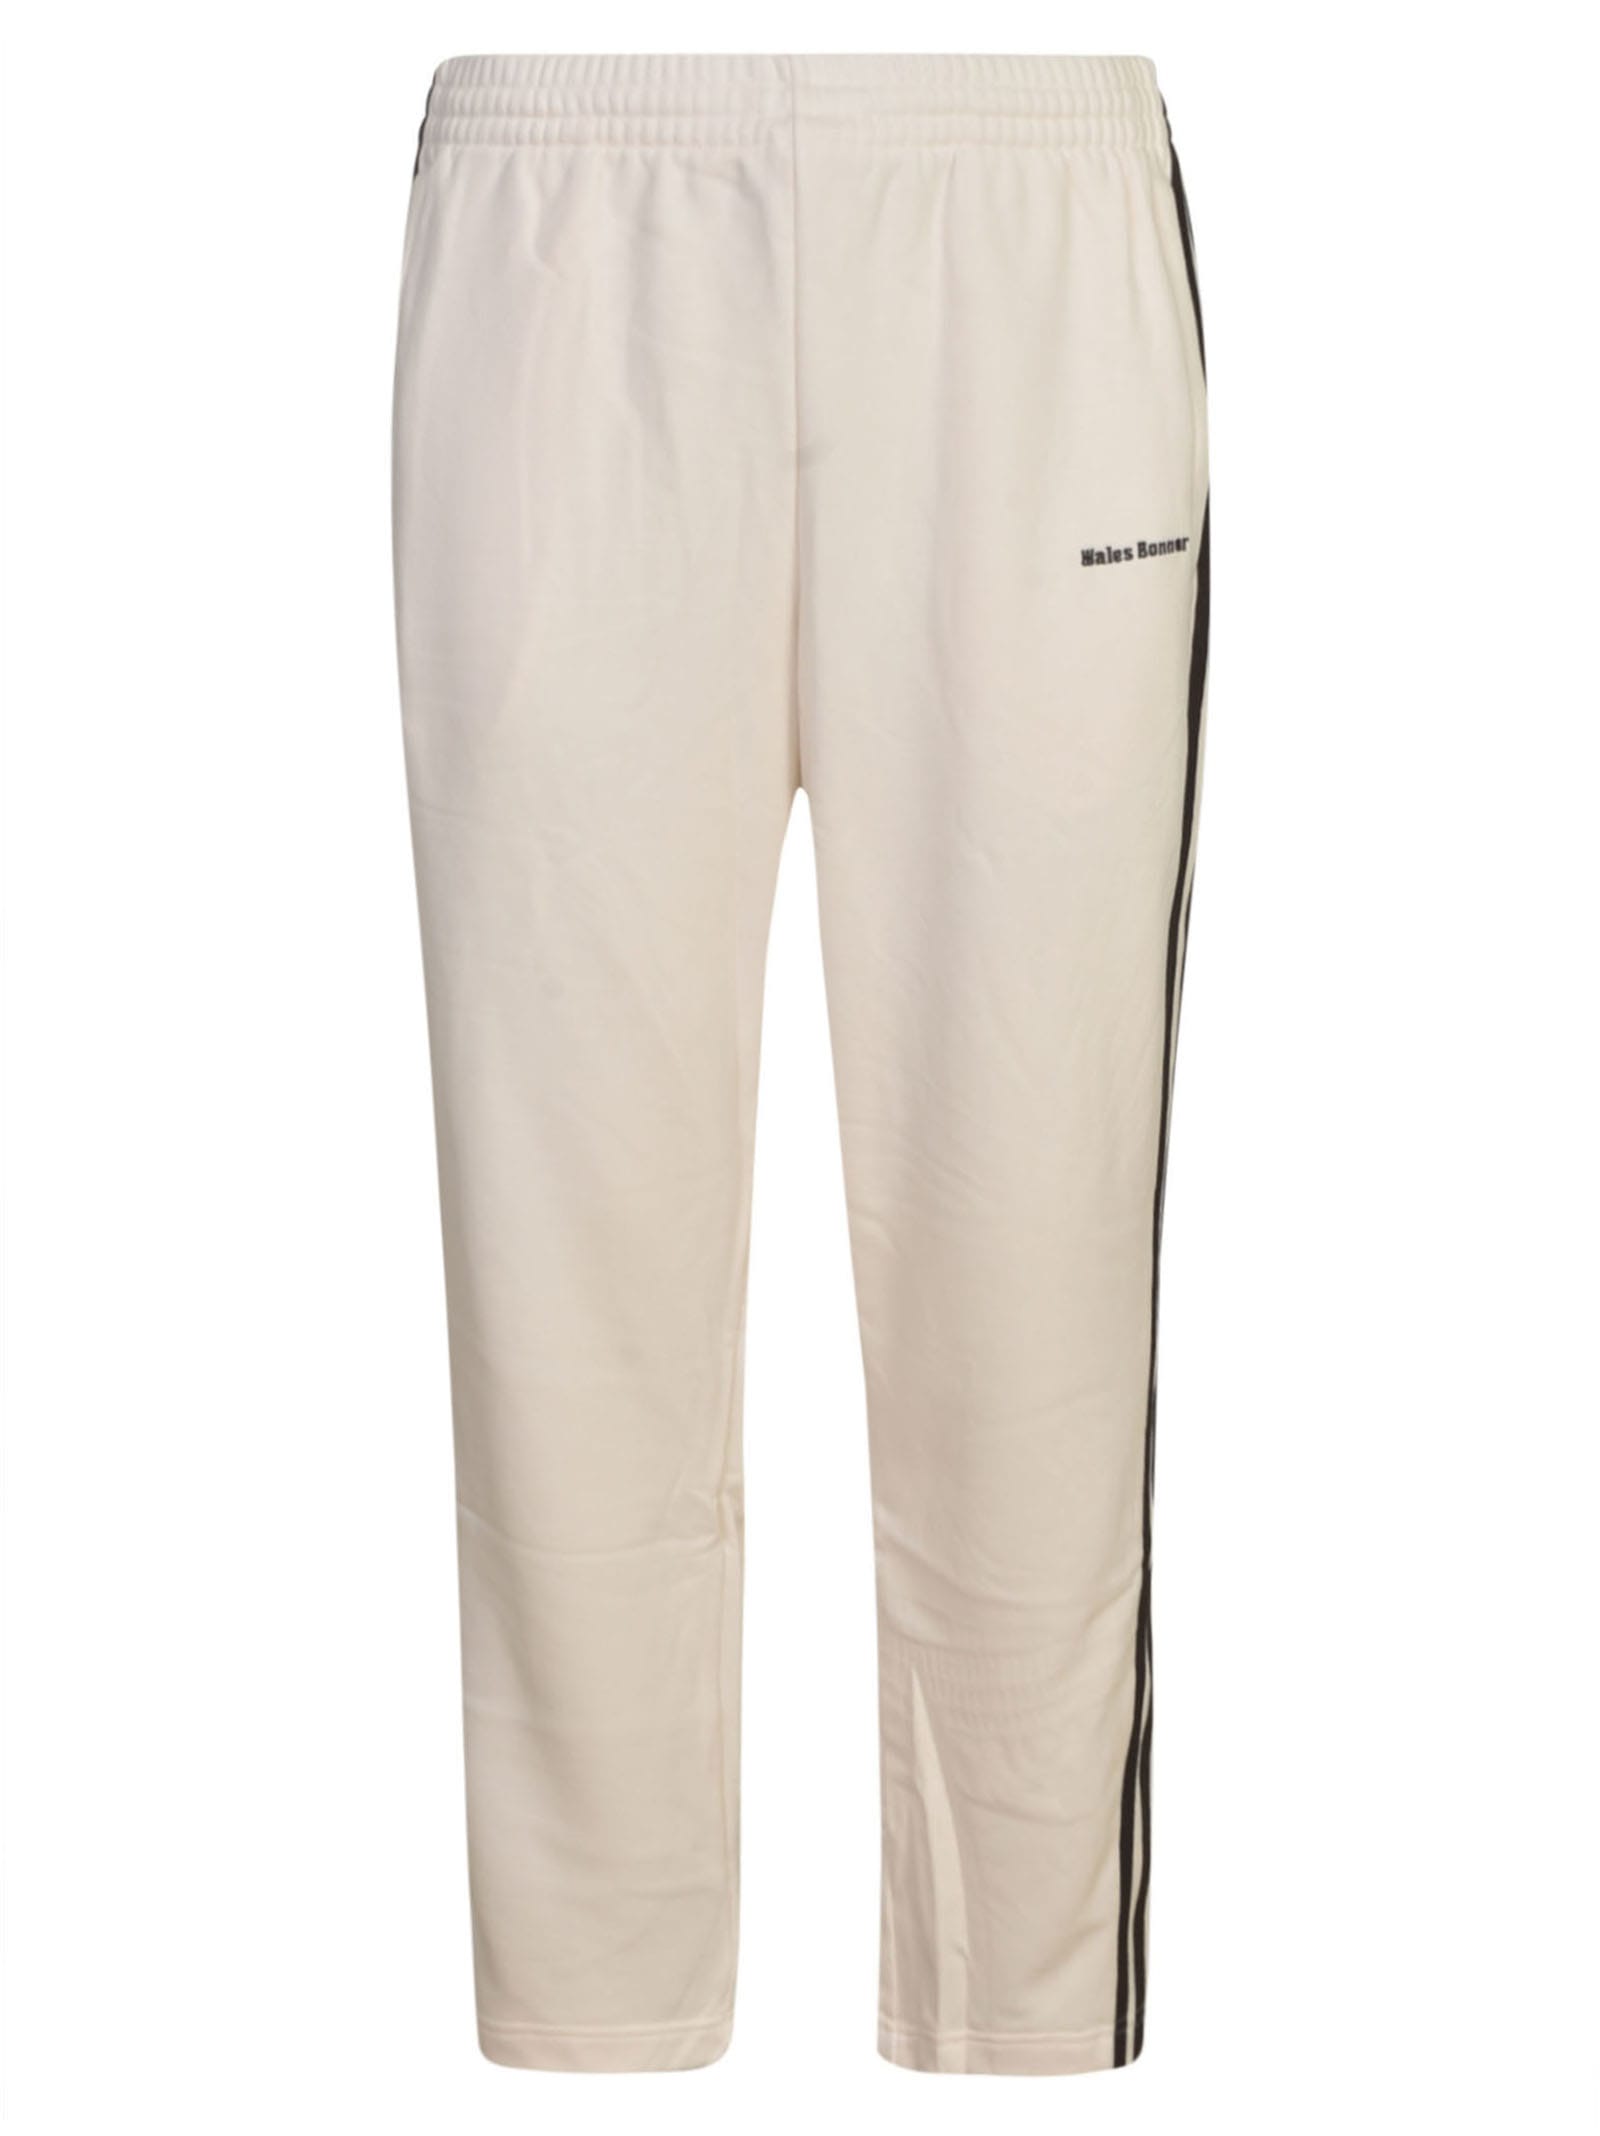 Adidas Originals By Wales Bonner Logo Detail Track Trousers In White